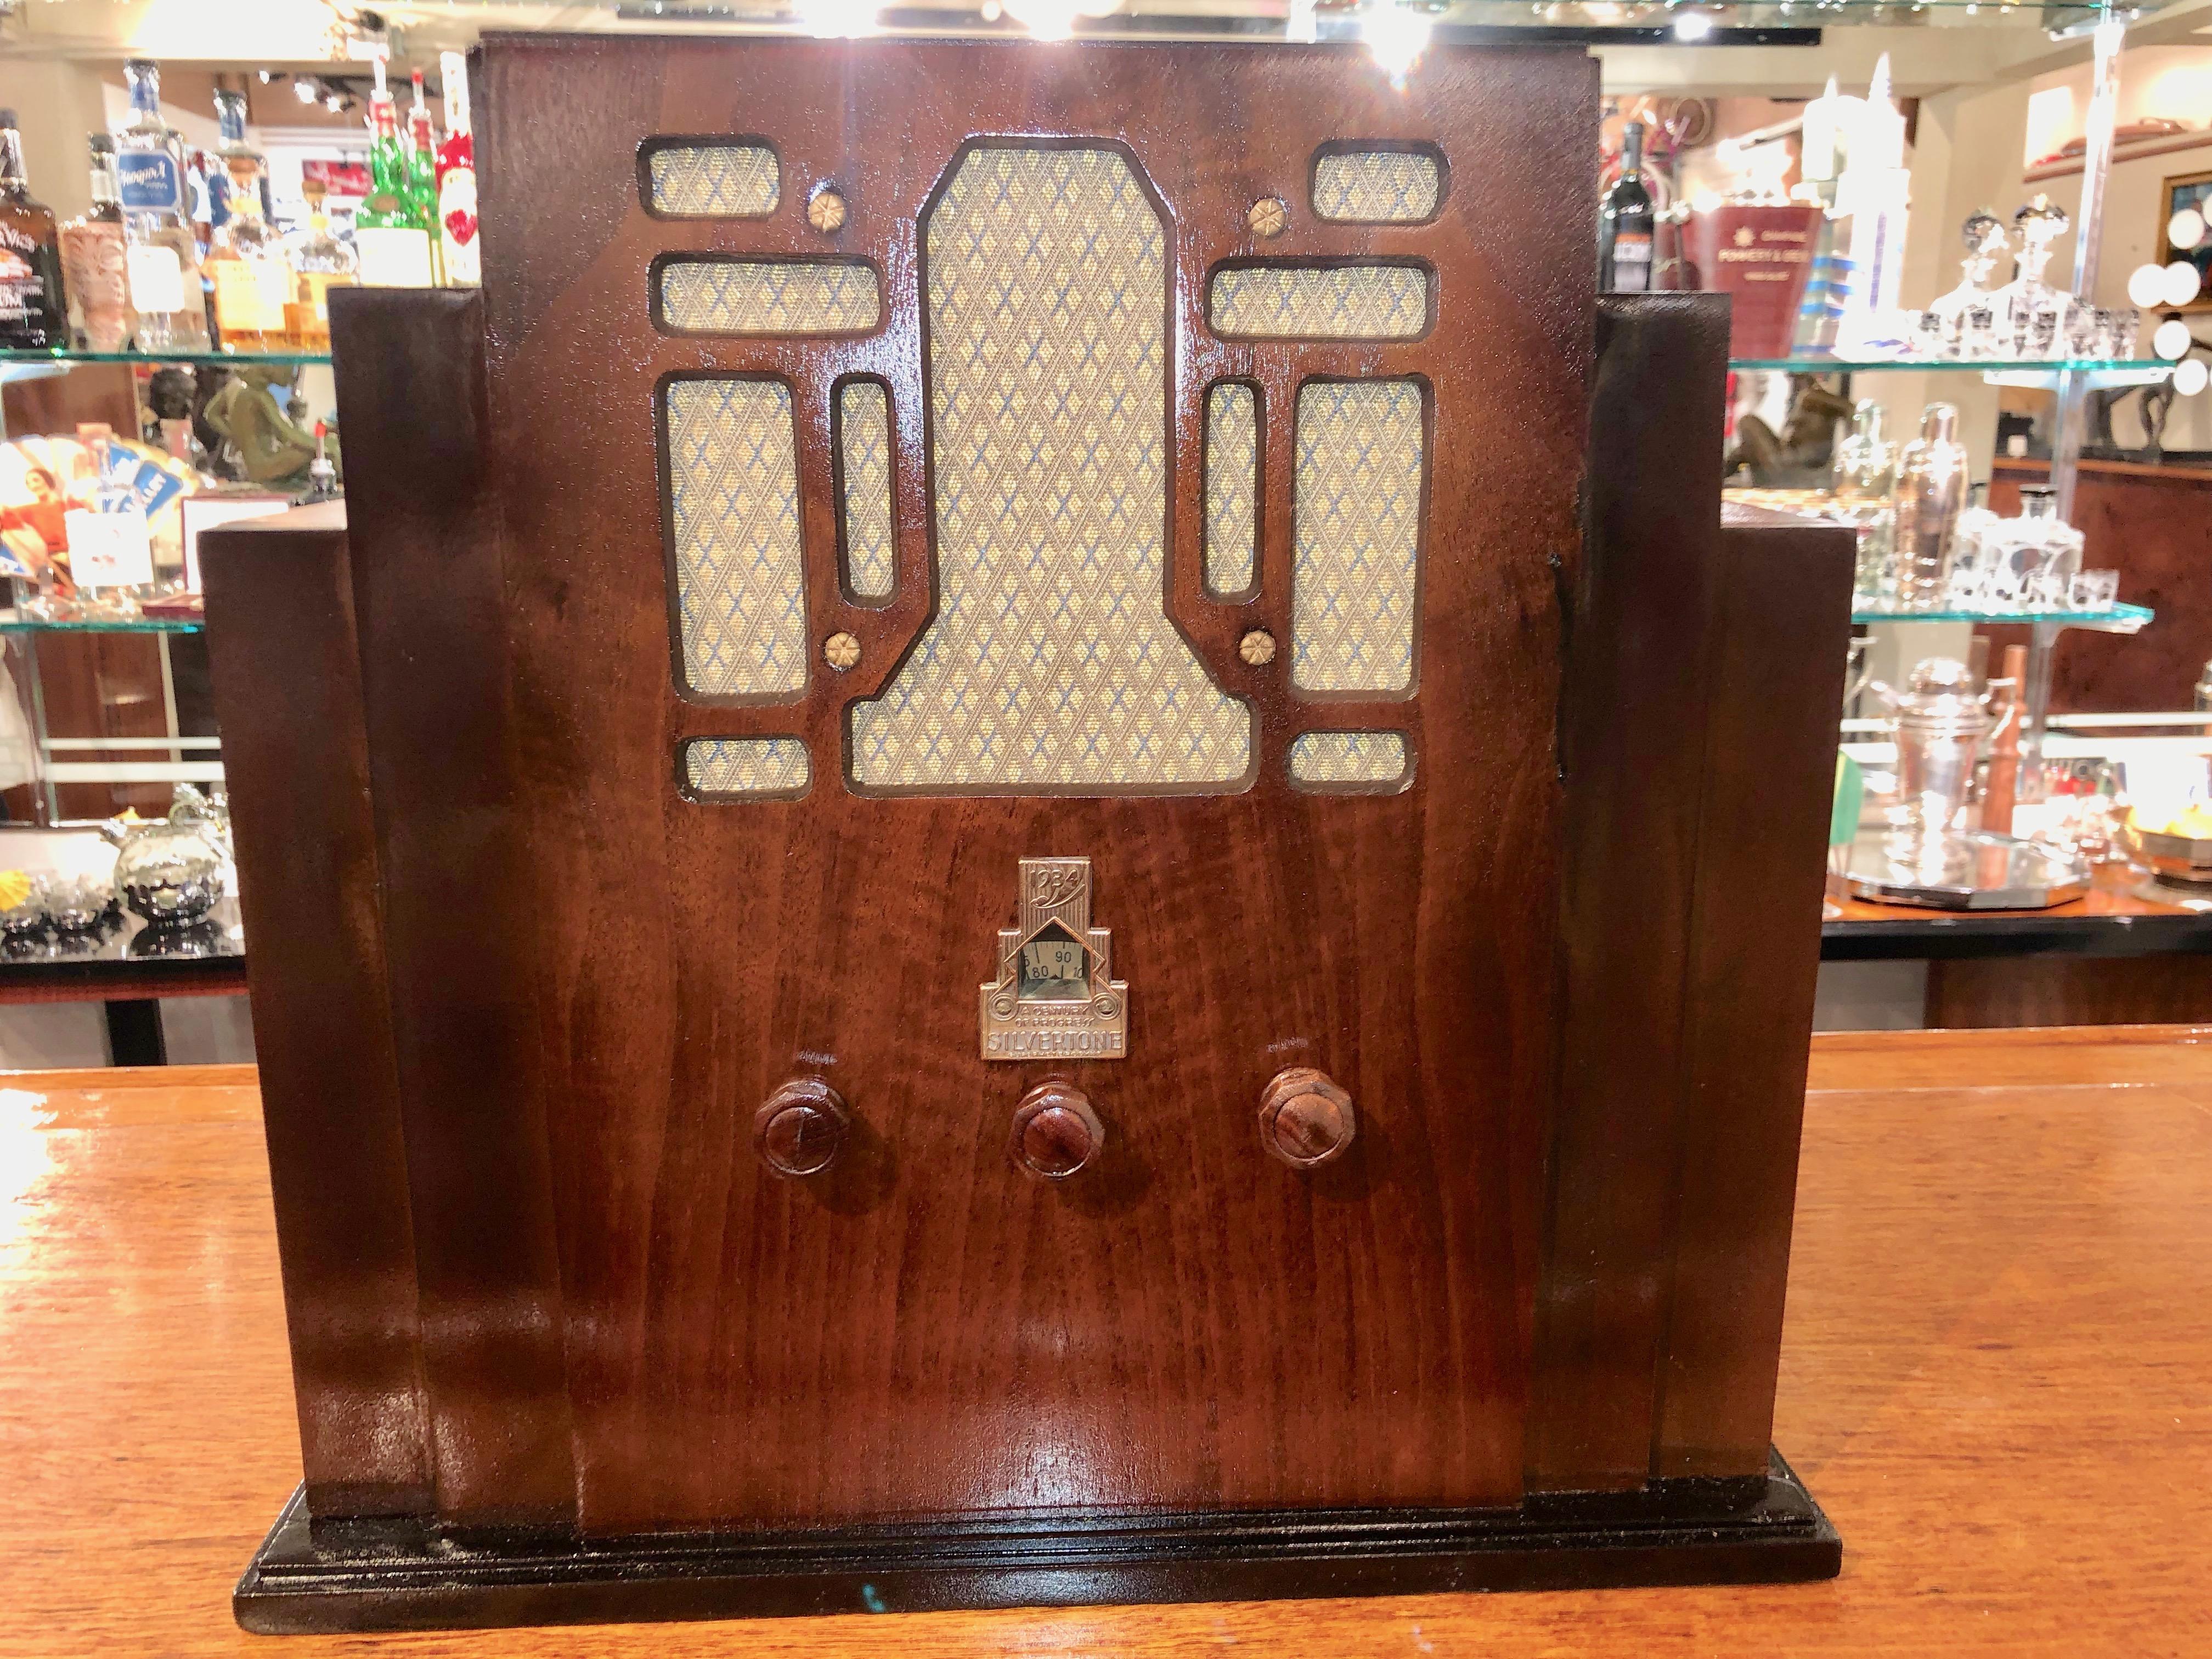 Original Skyscraper Chicago Worlds Fair clock cabinet. Restored cabinet with original metal Silvertone front plate. Stepped design is unique from the period and a very rare piece. We have adapted this with a modern bluetooth speaker, which allows